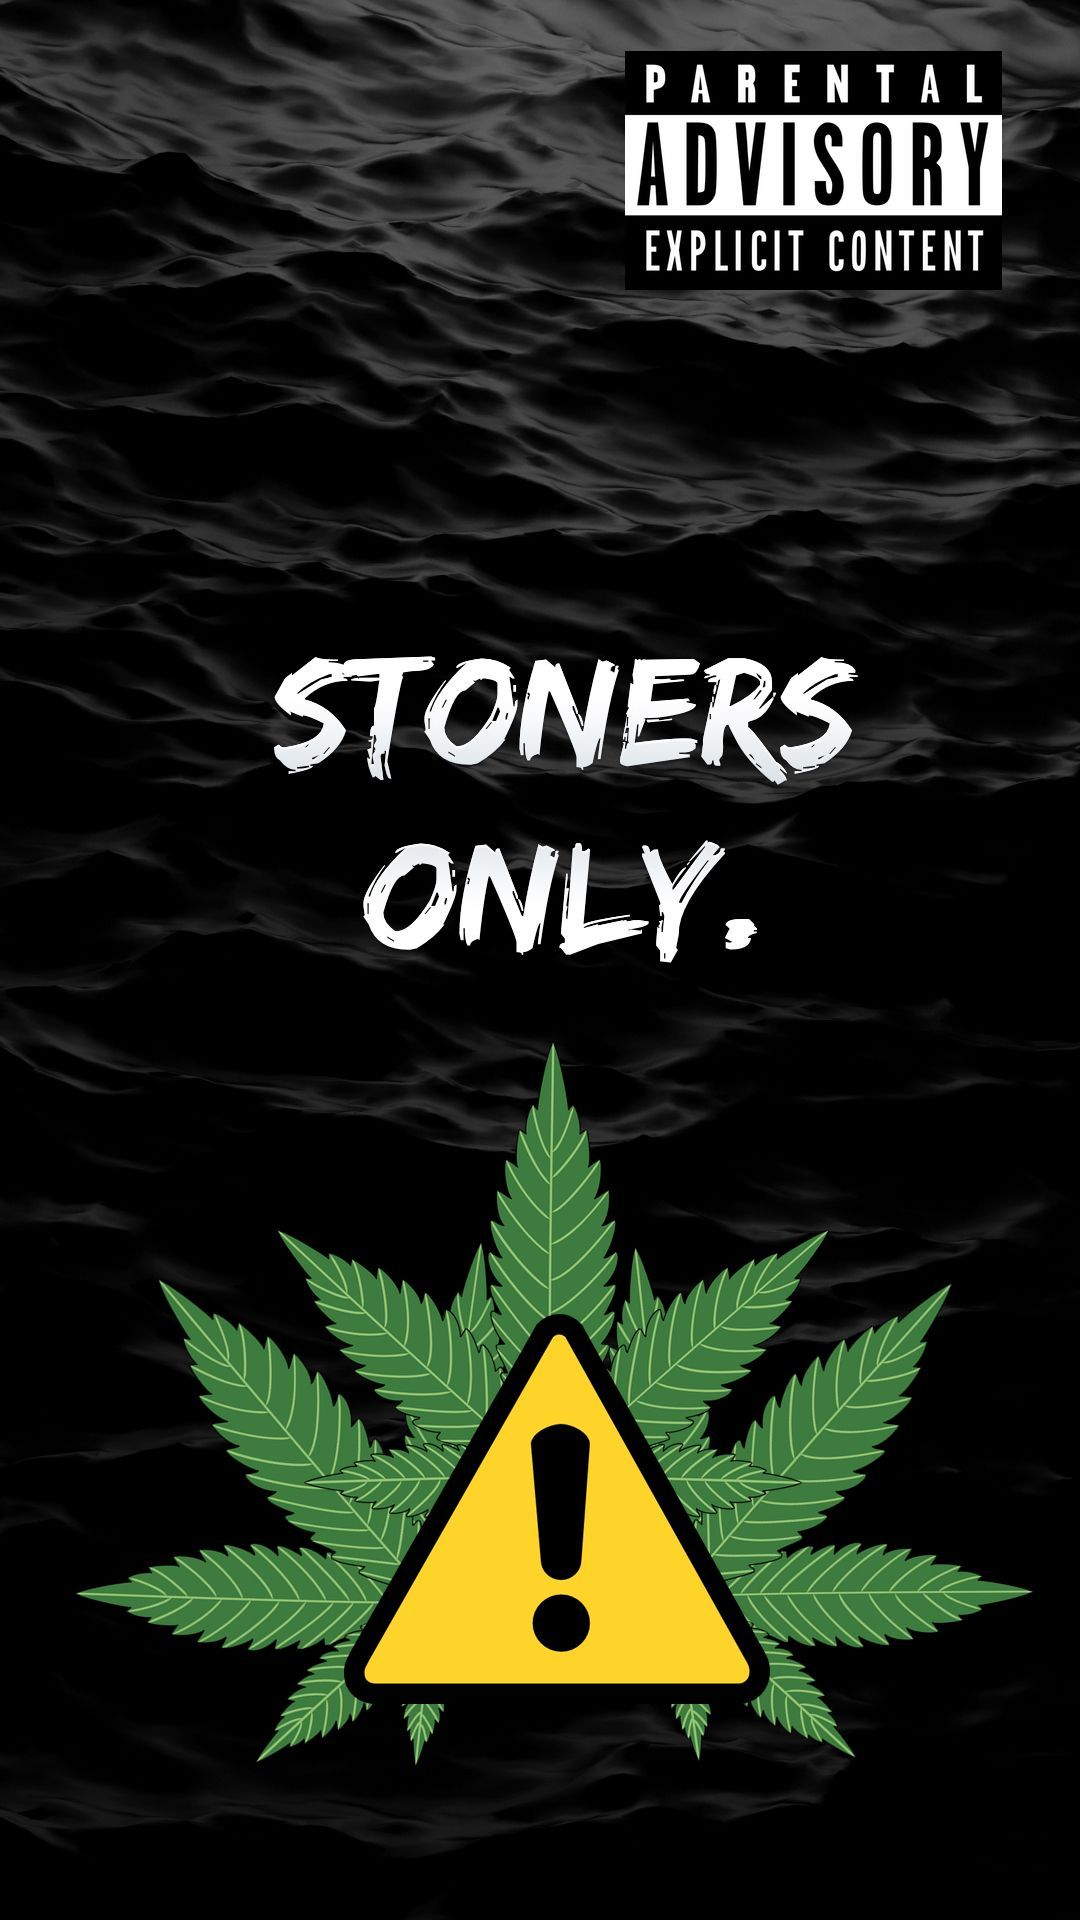 Stoner iPhone Wallpaper Free Stoner iPhone Background - Cannabis wallpaper, Weed wallpaper, Trippy iphone wallpaper